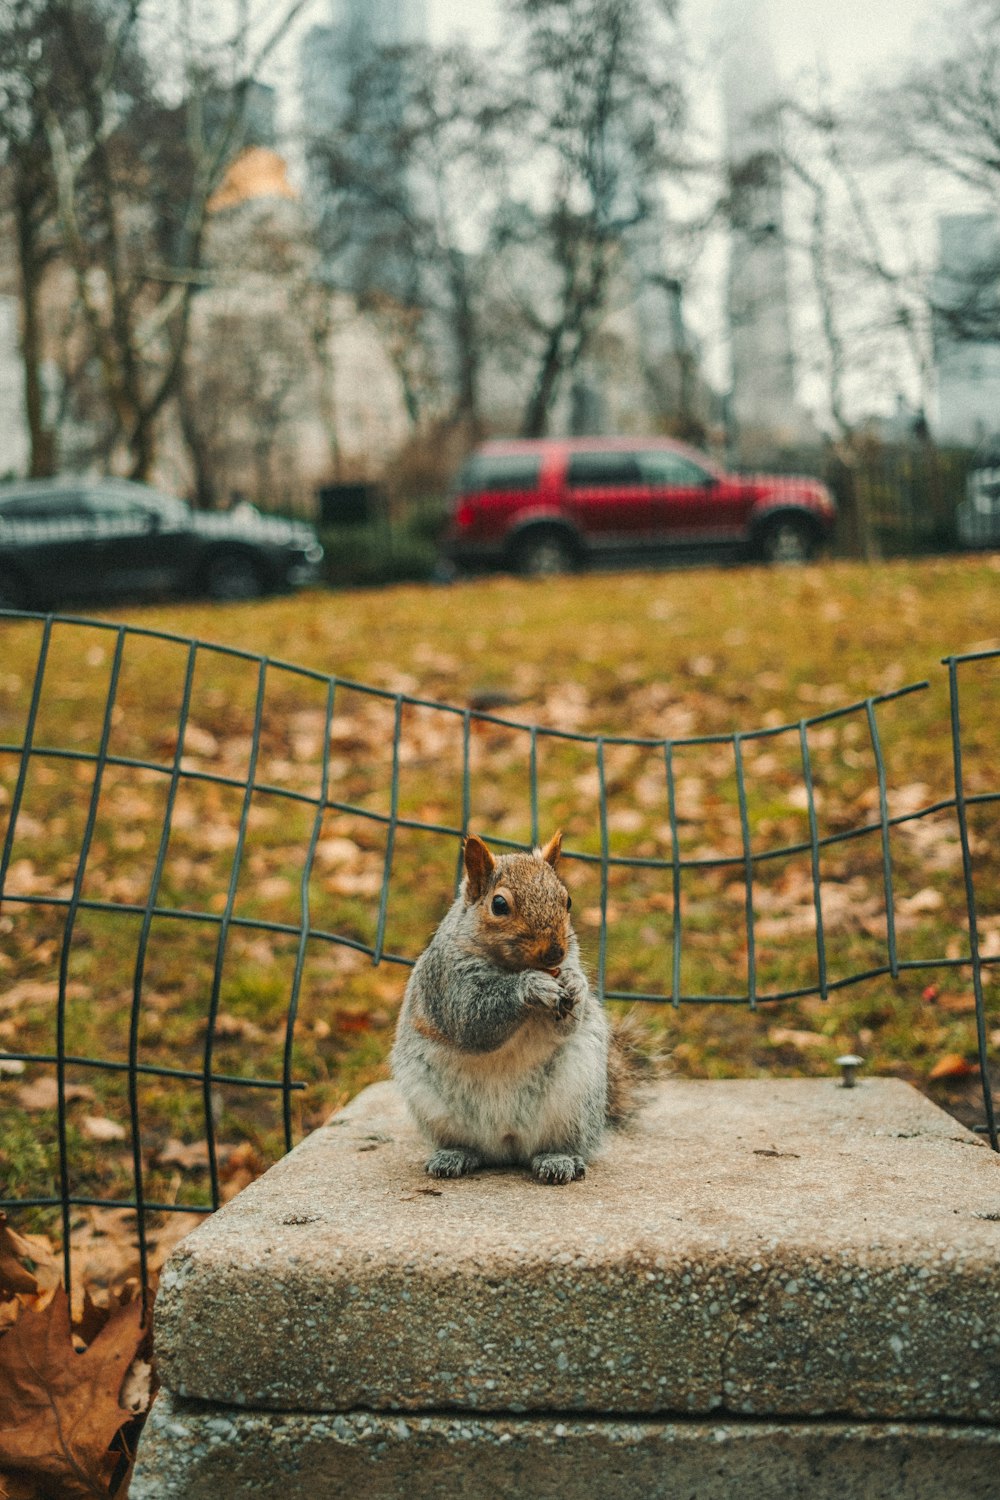 a squirrel sitting on a bench in a park